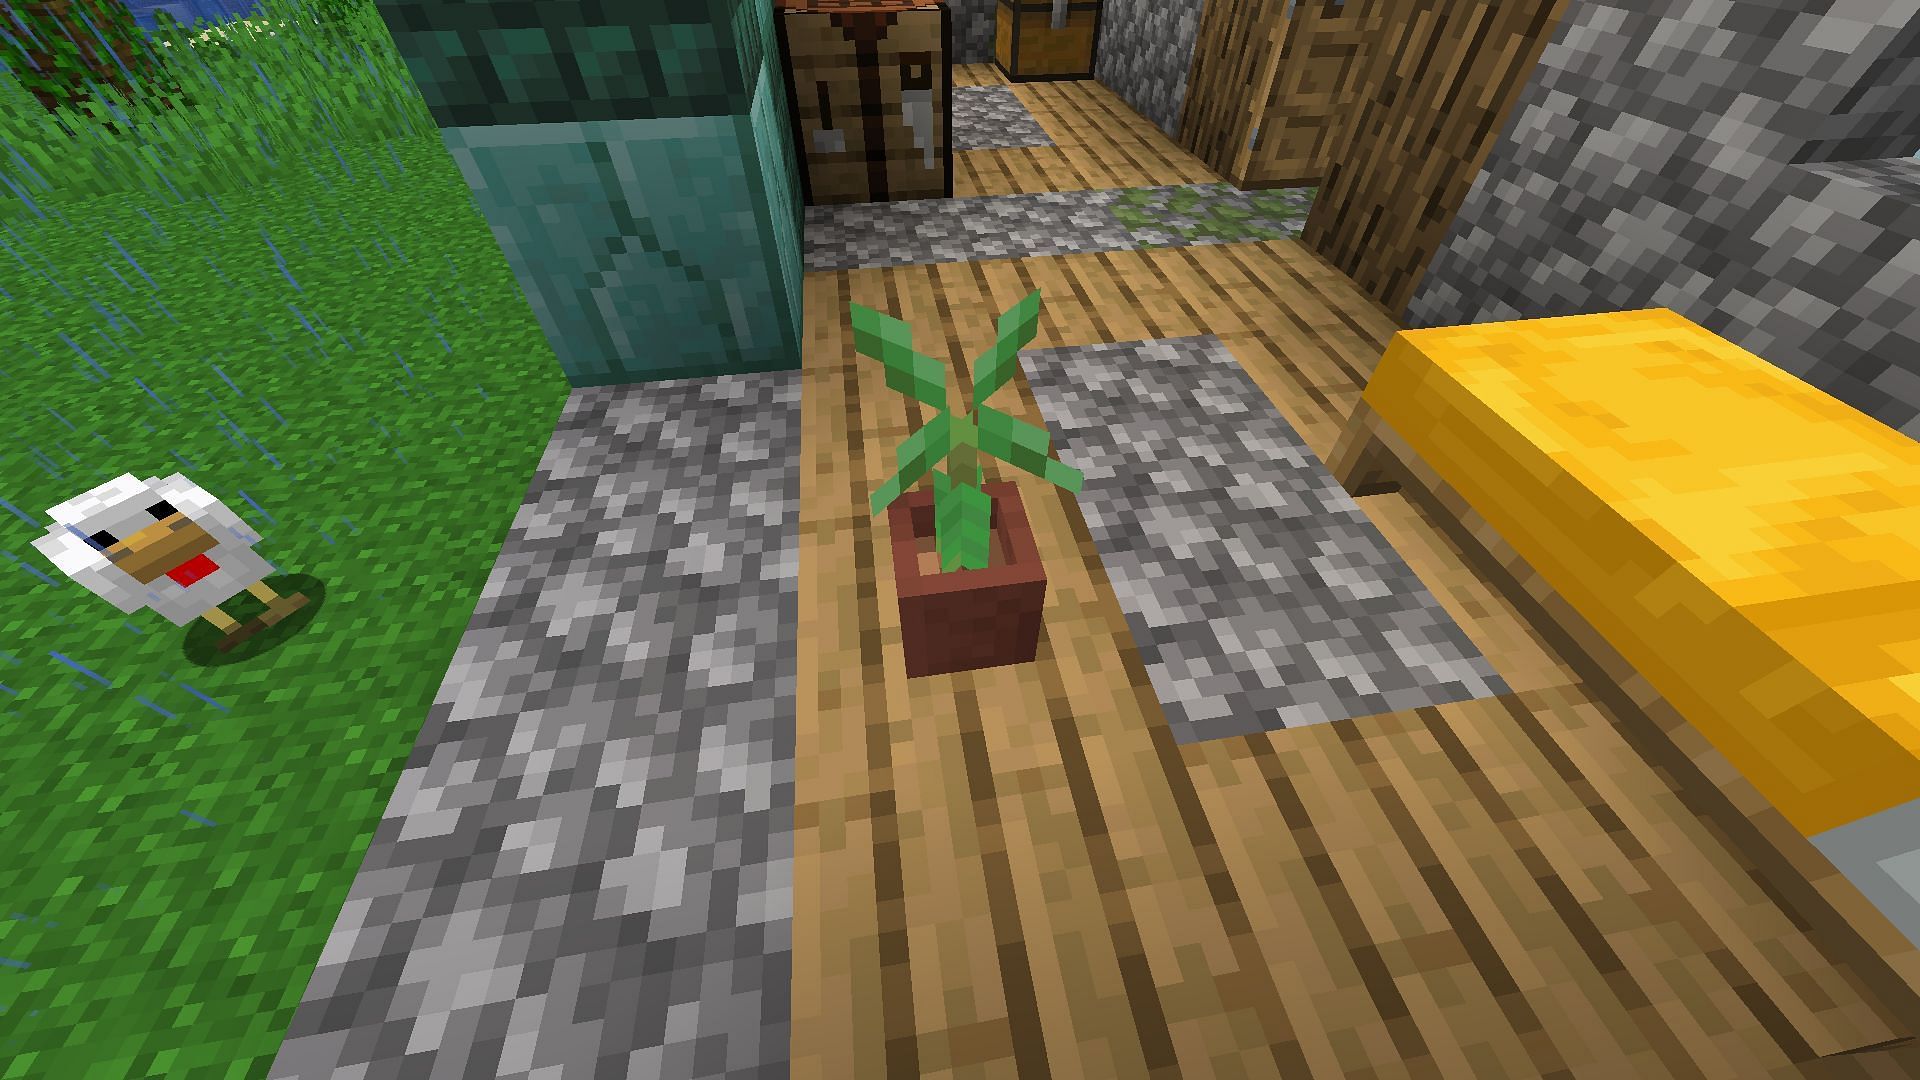 New Mangrove propagule placed in the flower pot (Image via Minecraft 1.19 update)